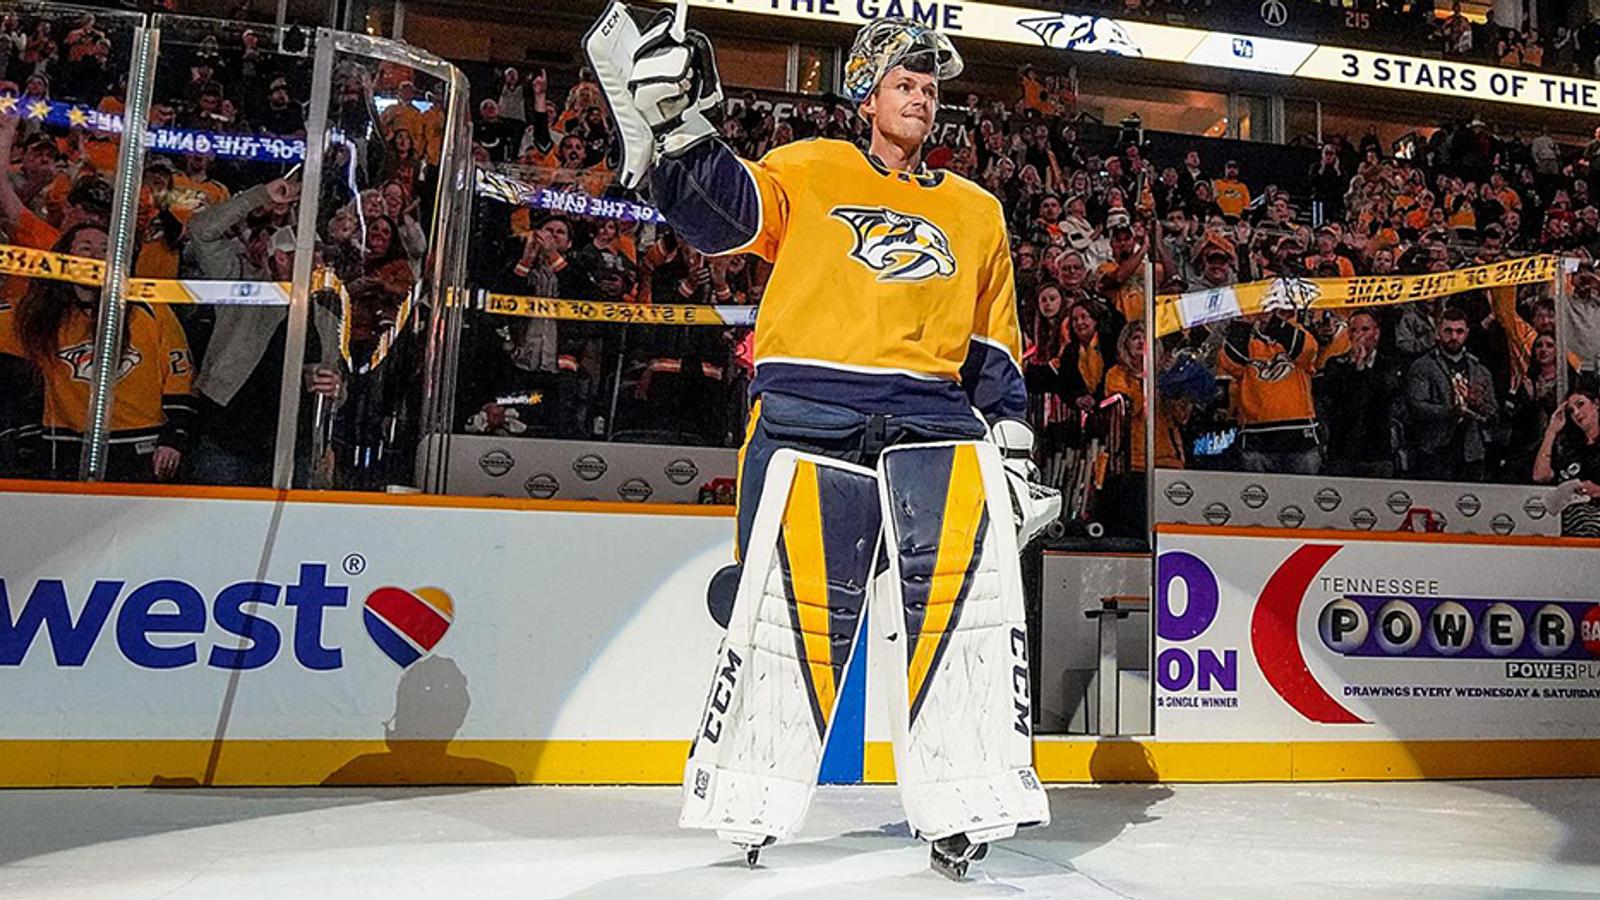 Preds legend Pekka Rinne officially retires after 15 NHL seasons